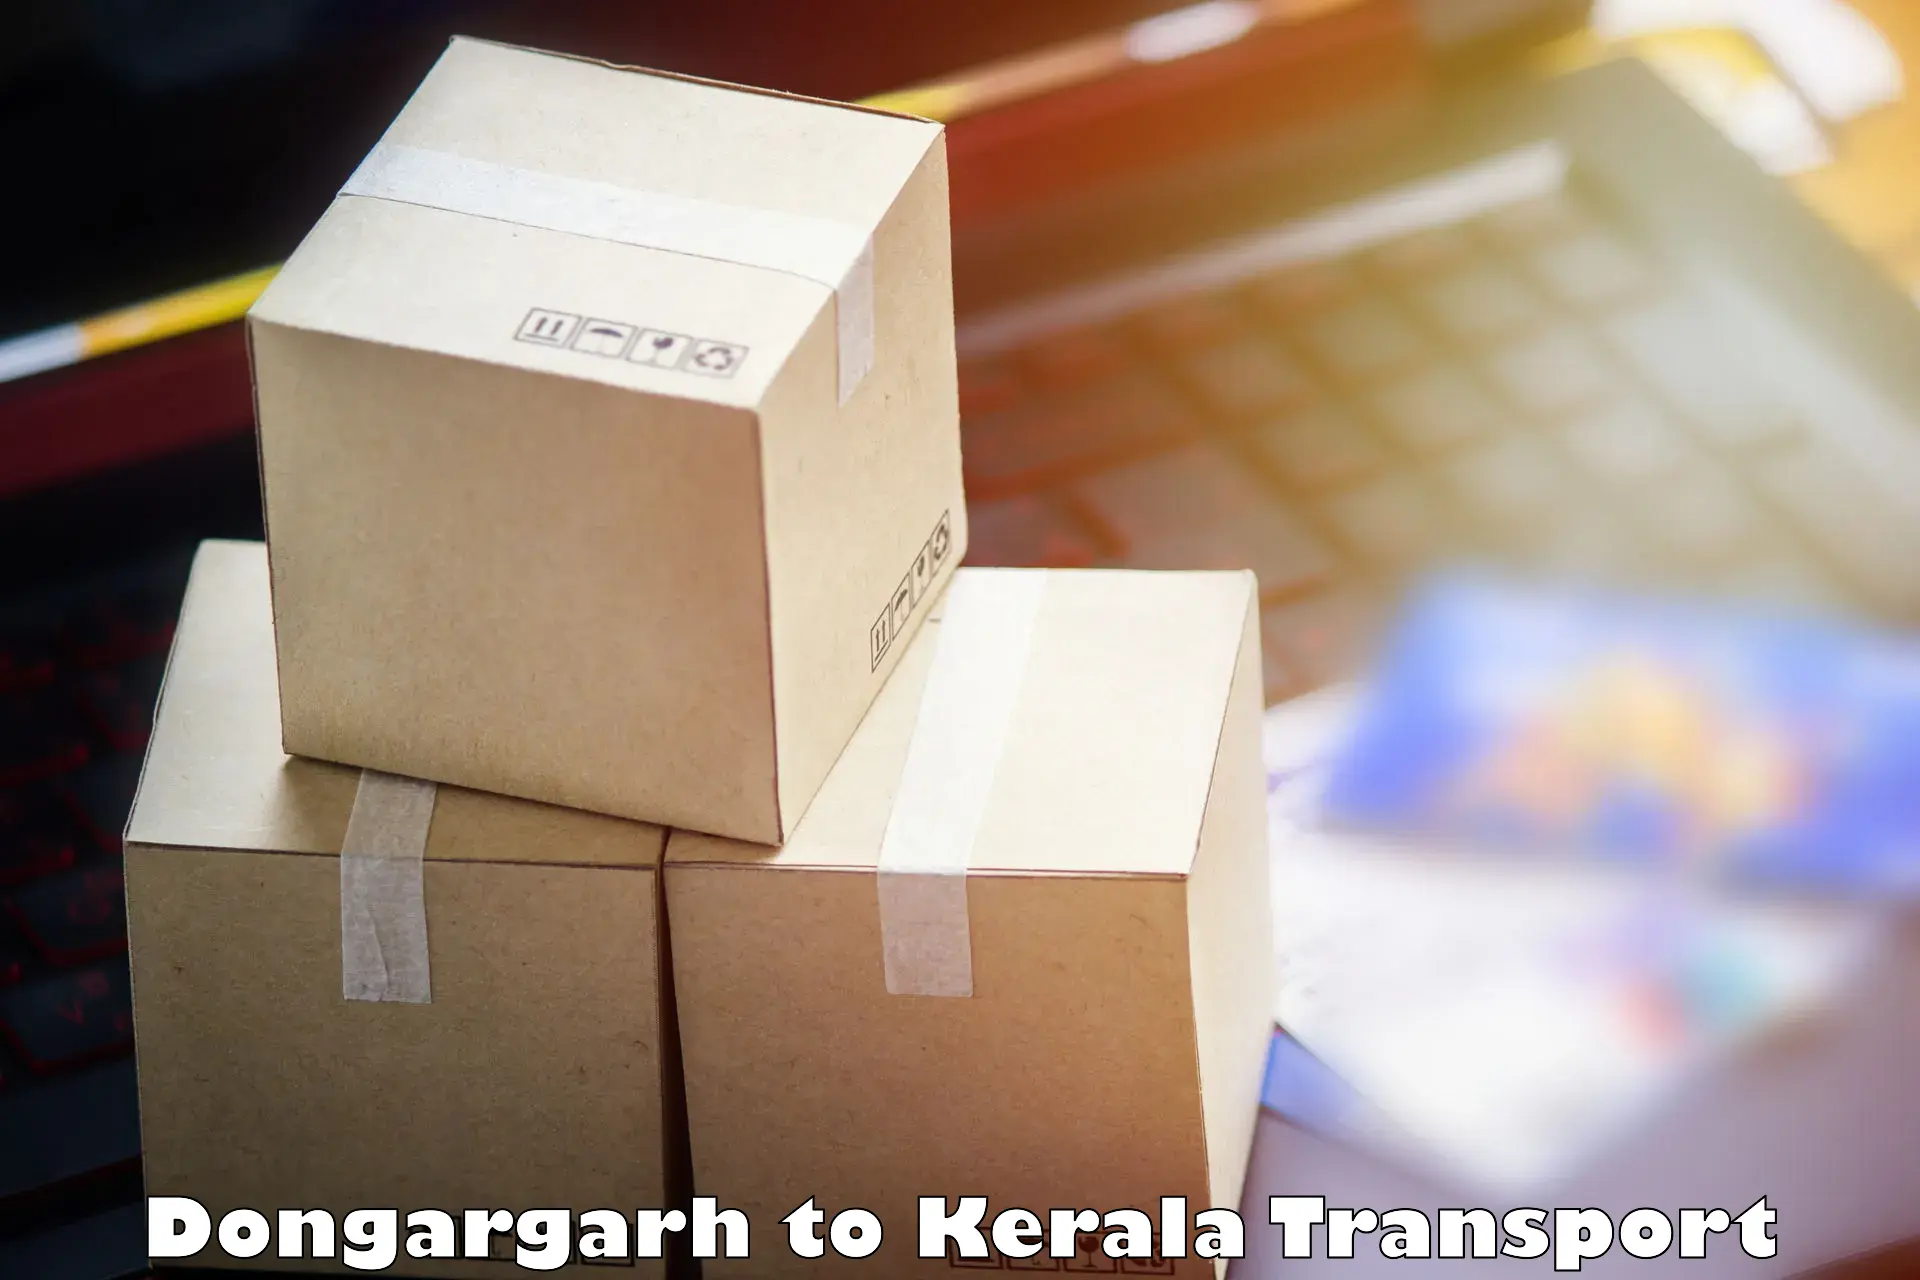 Online transport service Dongargarh to Cochin University of Science and Technology